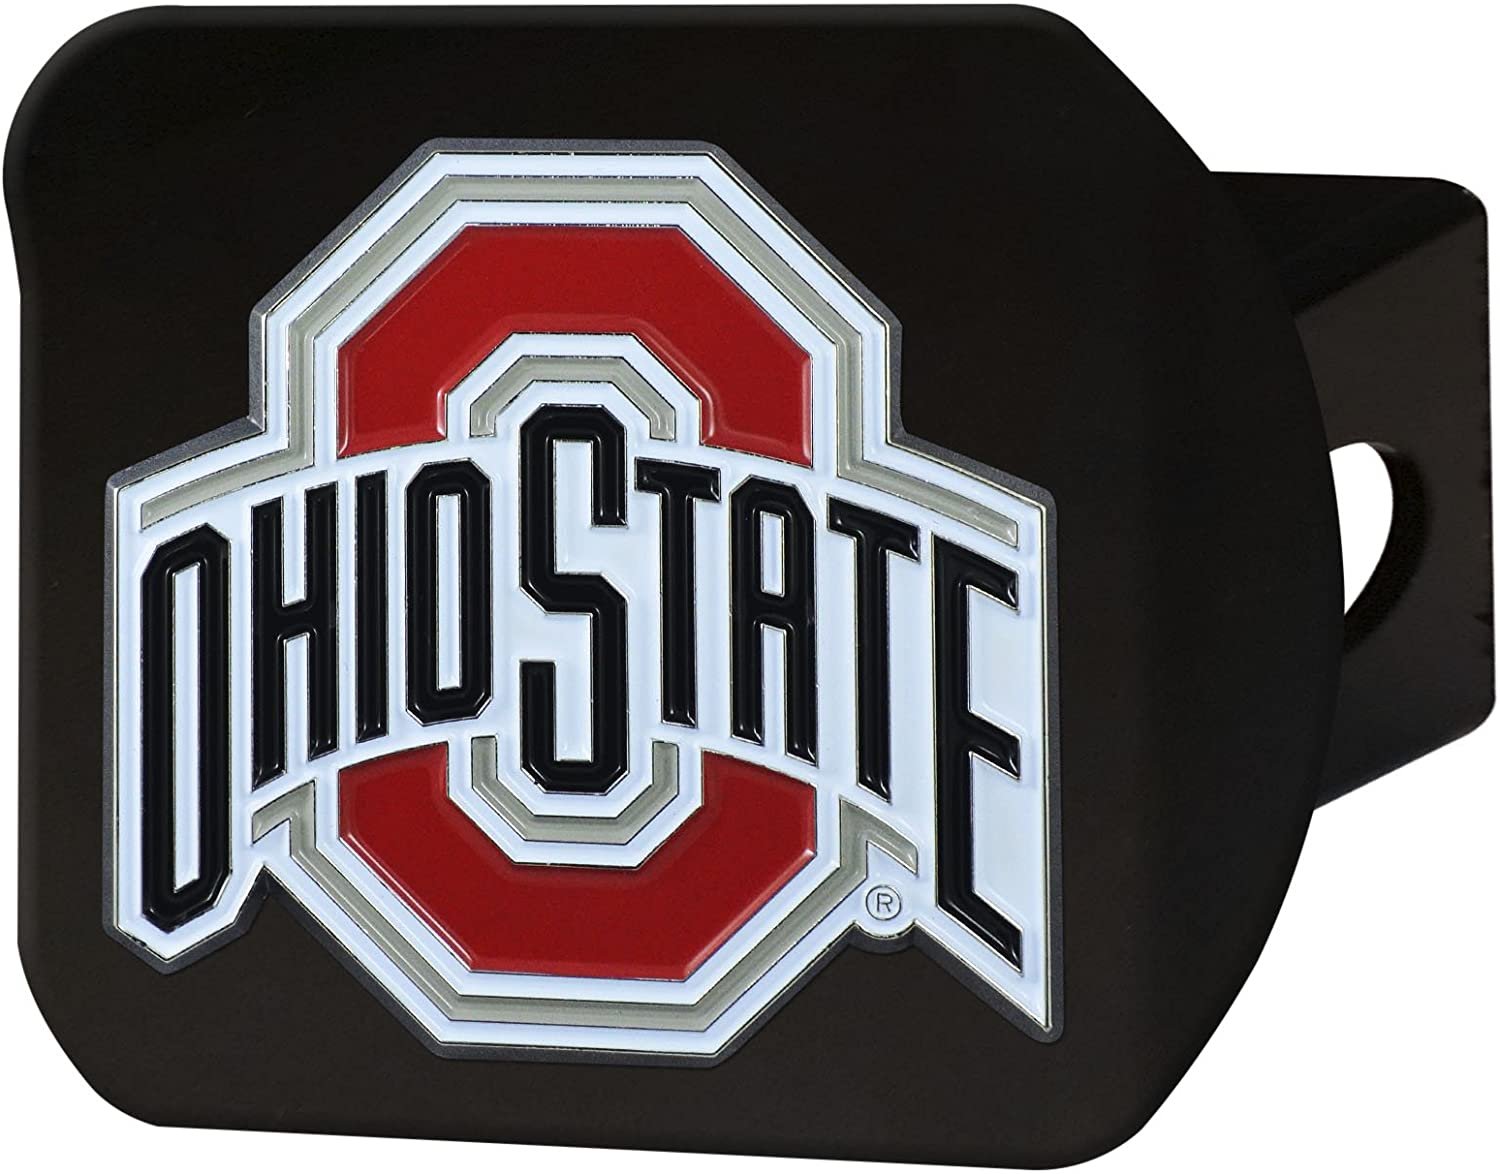 Ohio State Buckeyes Solid Metal Black Hitch Cover with Color Metal Emblem 2 Inch Square Type III University of